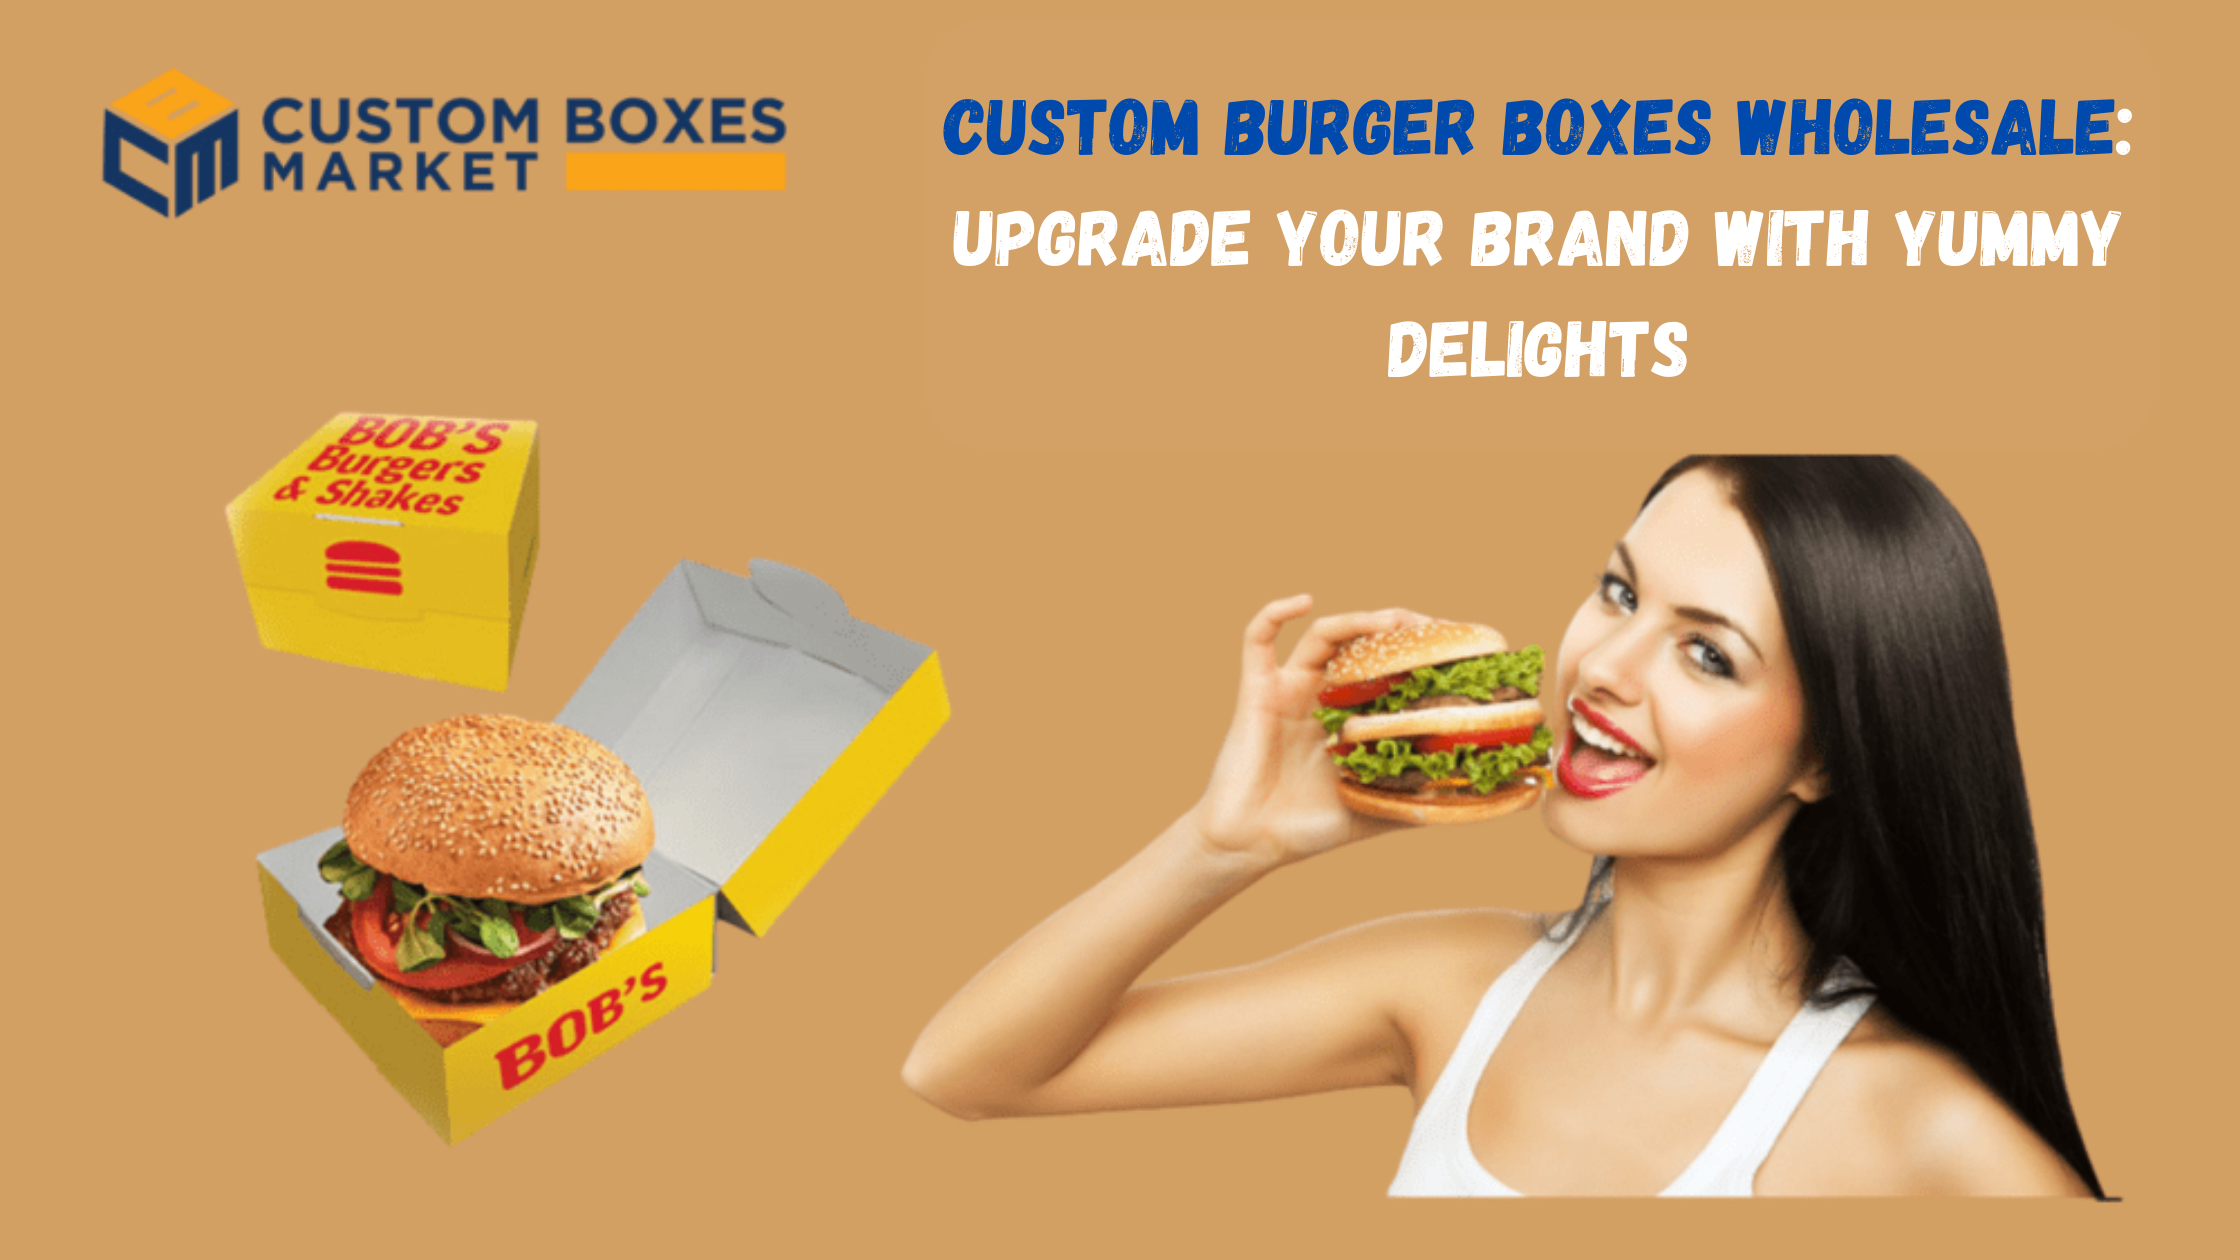 Custom Burger Boxes Wholesale Upgrade your Brand with Yummy Delights